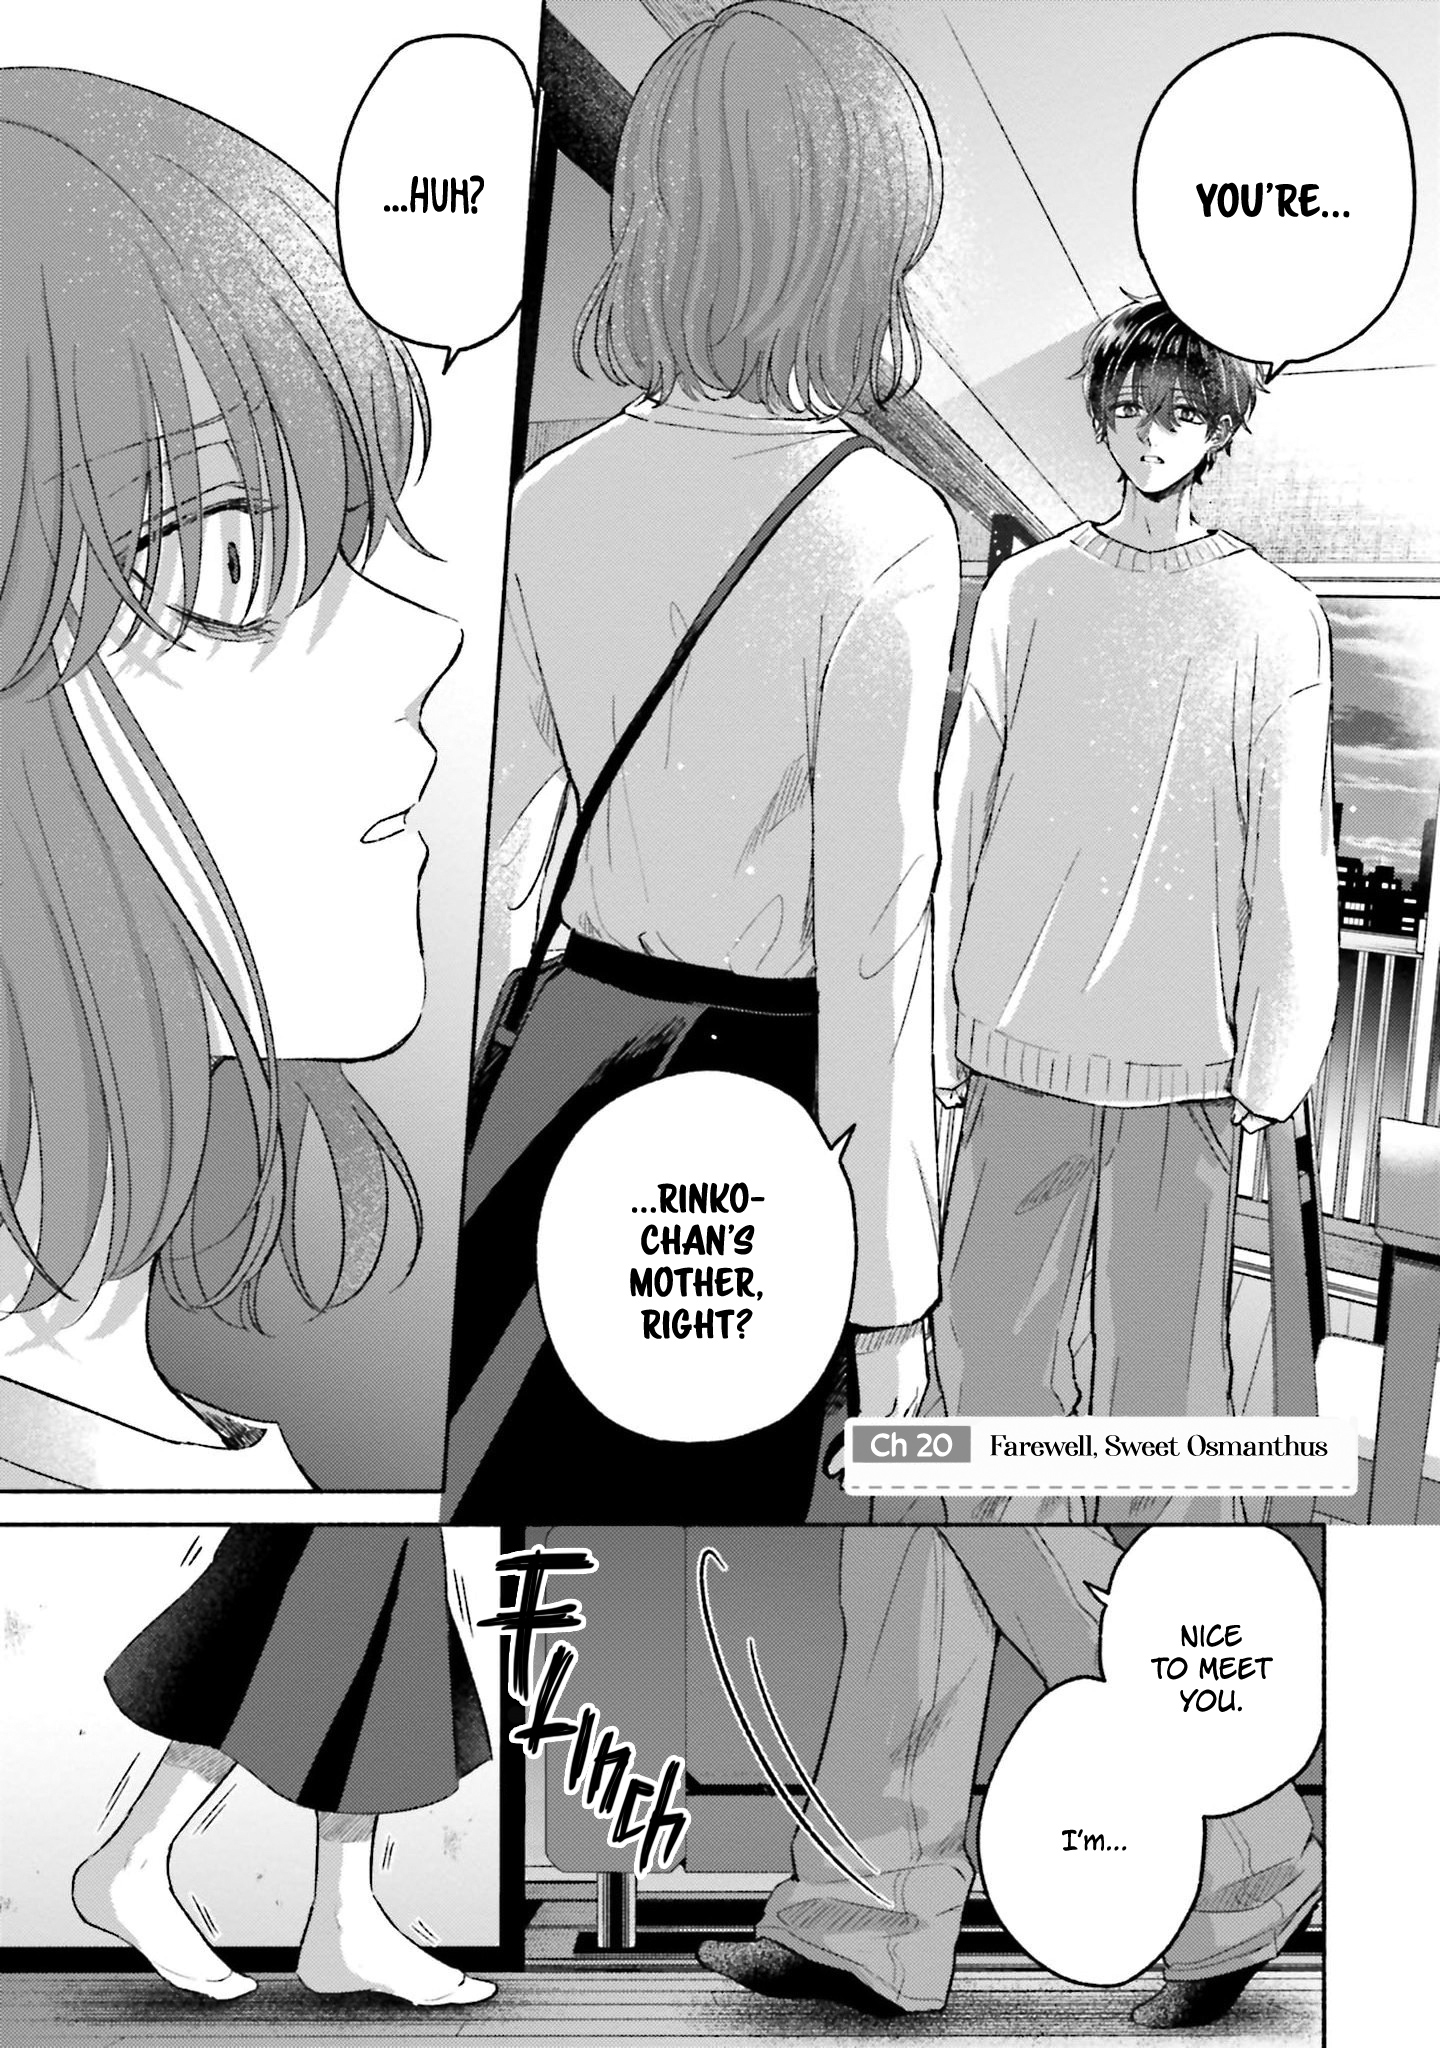 Rinko-Chan To Himosugara Vol.4 Chapter 20: Farewell, Sweet Osmanthus - Picture 1